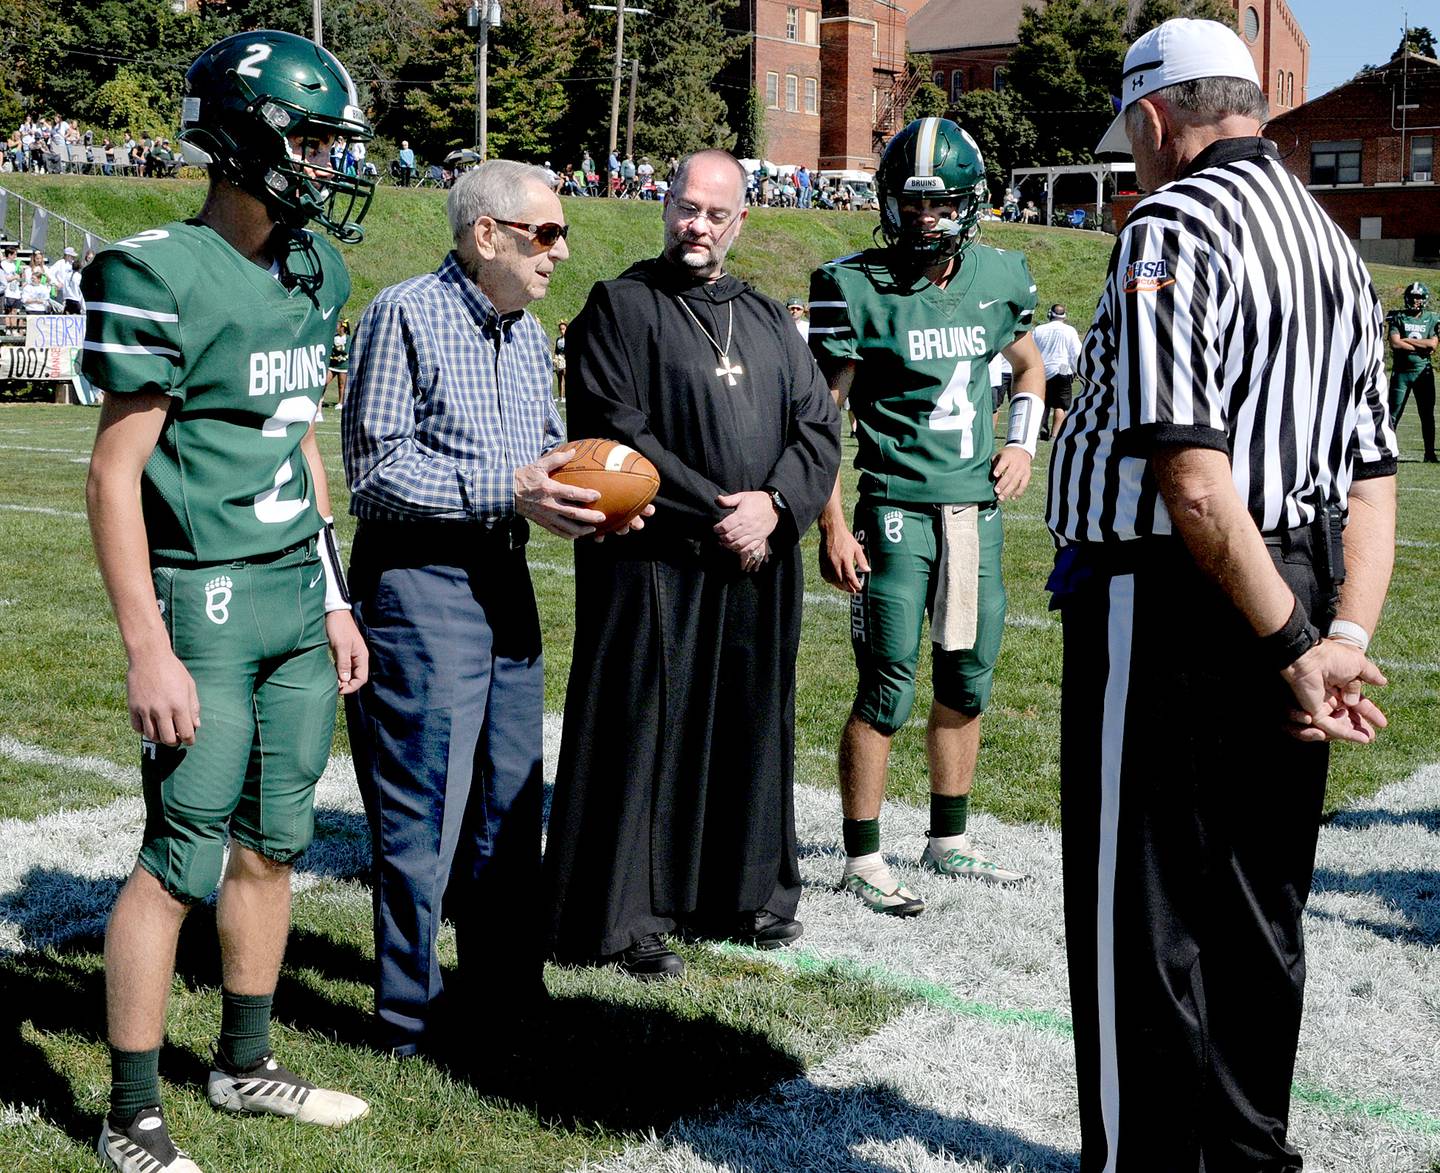 Melvin Baima, who is a 100 year old from the St Bede class of 1939, presents the game ball as his two great grandsons Ryan and John Brady along with Abbot Michael Calhoun look on Saturday, Oct. 1, 2022 before the Homecoming game against Bureau Valley.